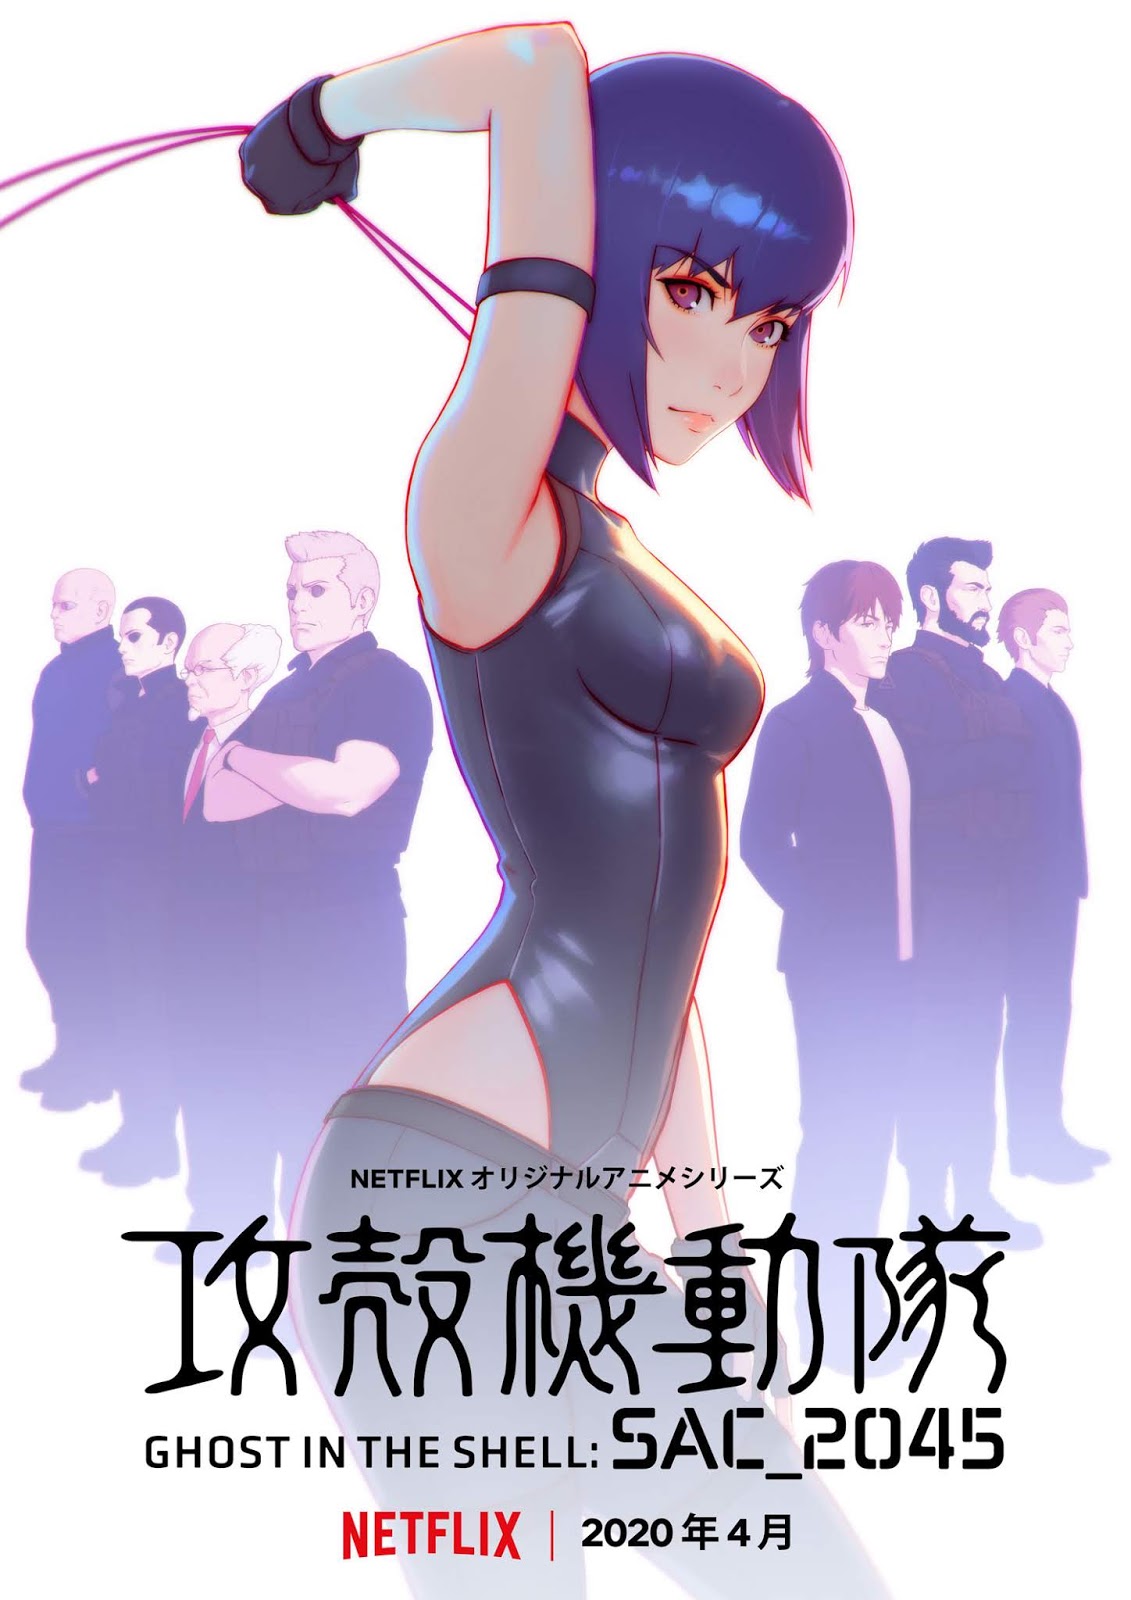 WATCH: GHOST IN THE SHELL: SAC_2045 Releases First Trailer